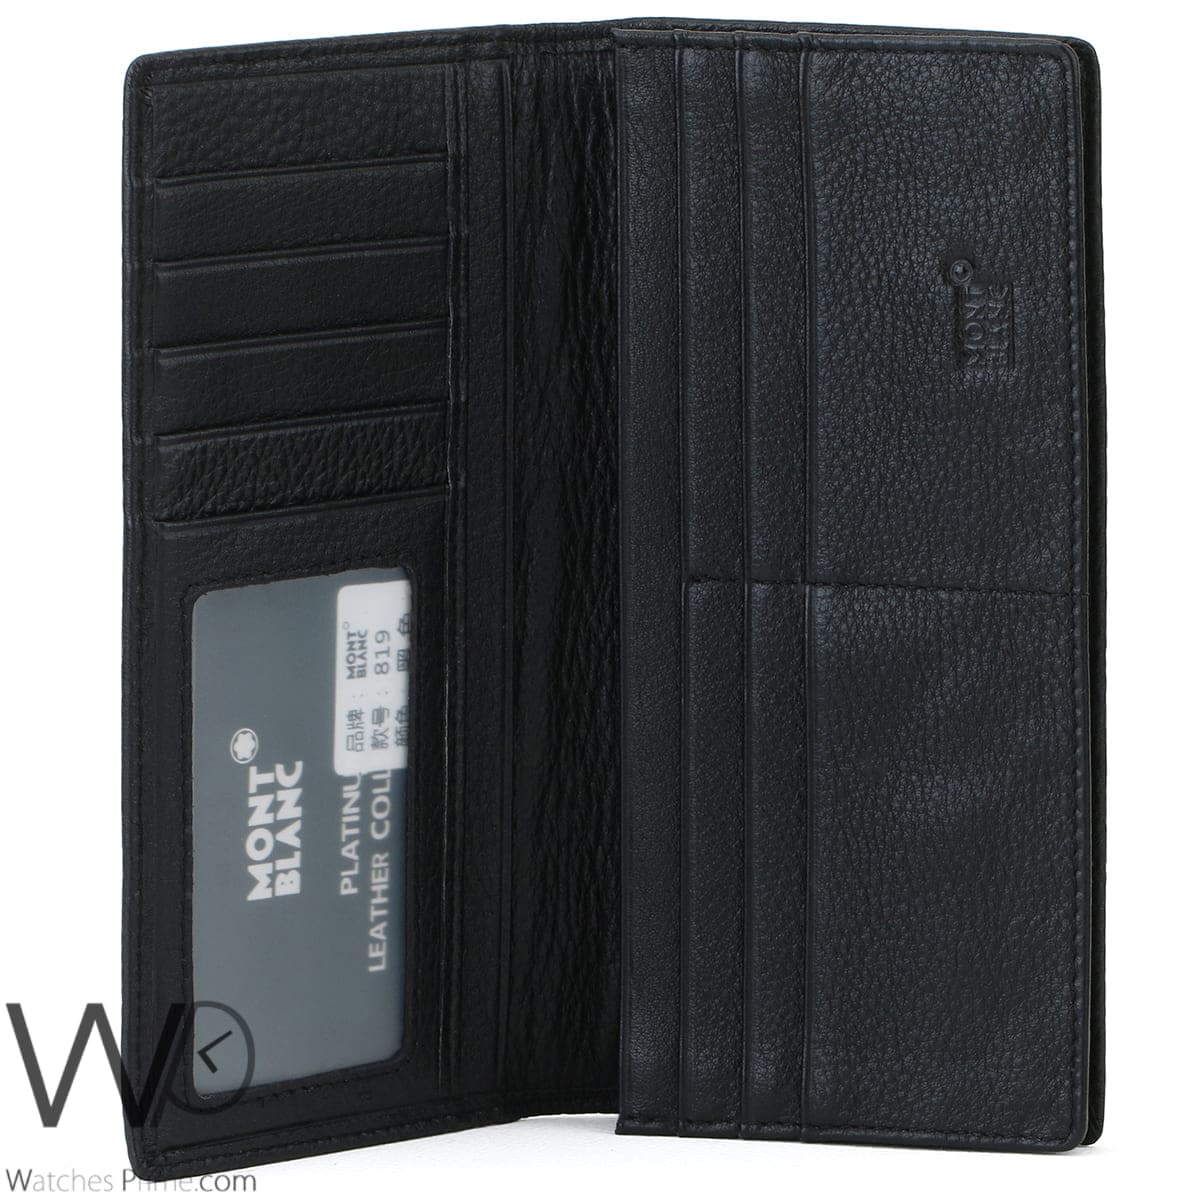 Montblanc Long Wallet Black Leather For Men | Watches Prime